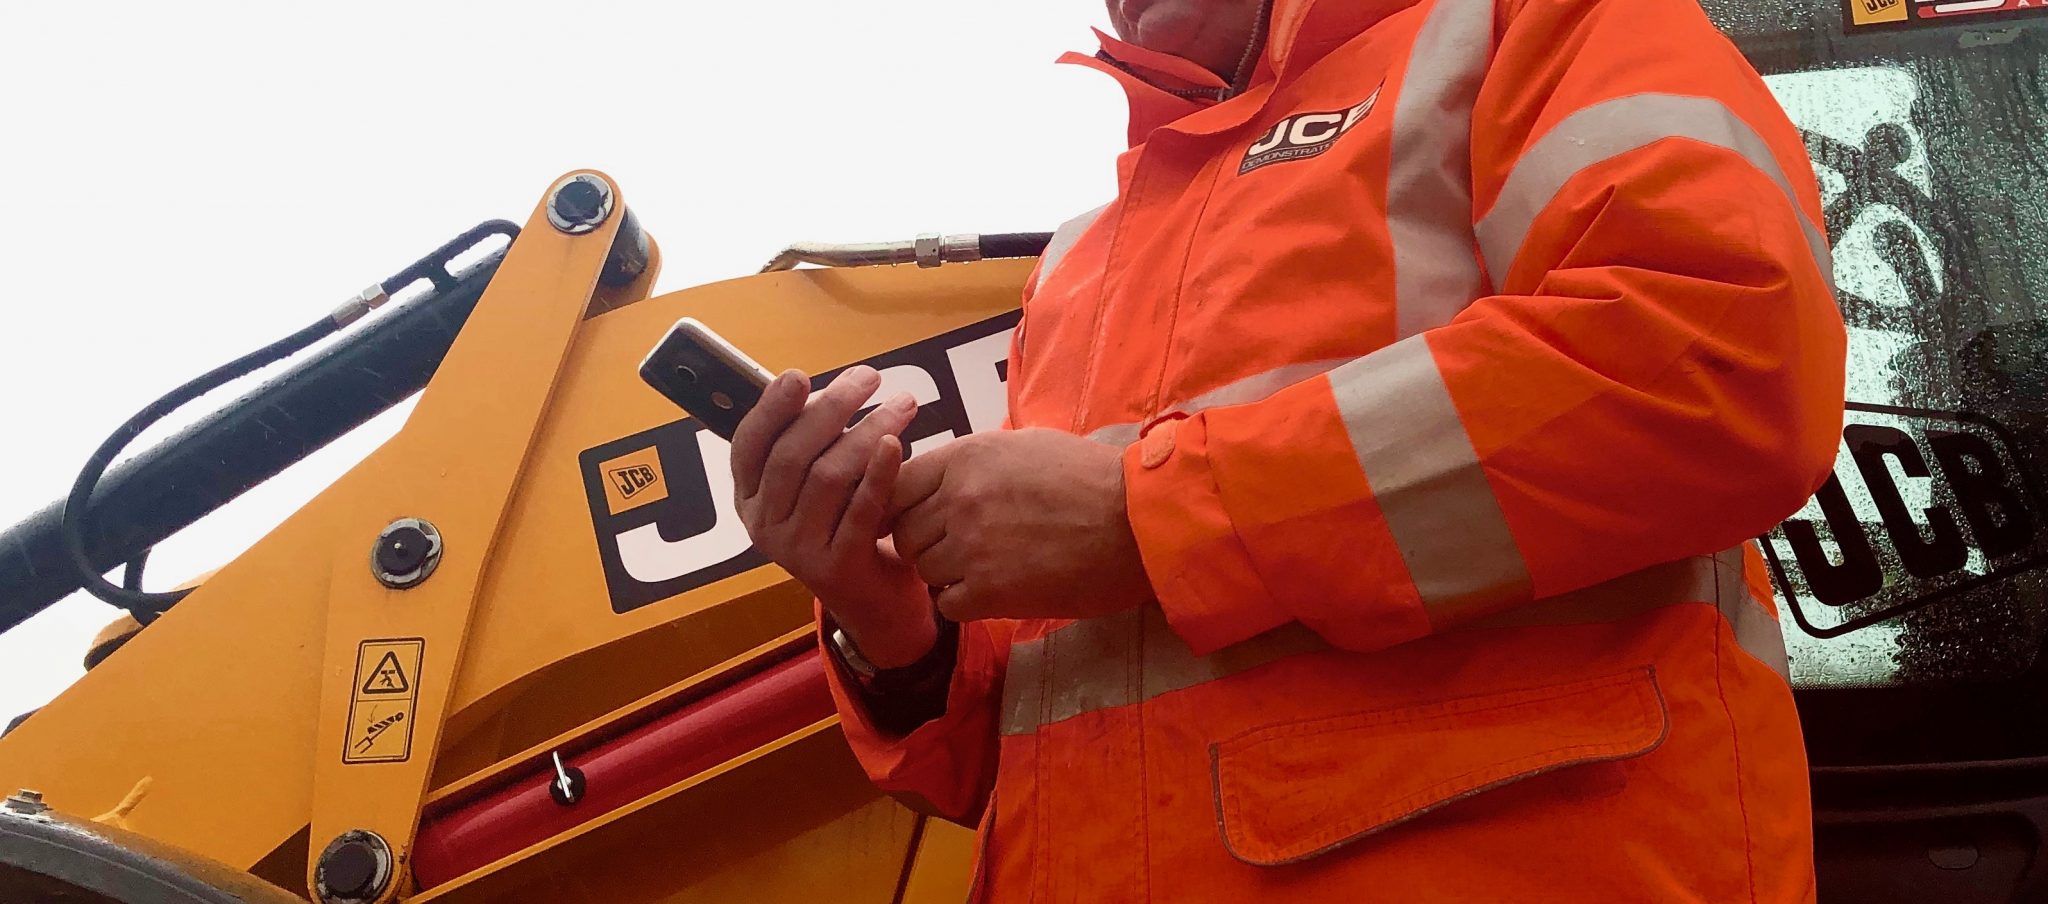 jcb employees at a staffordshire quarry are now fully connected thanks to a vodafone mini mast